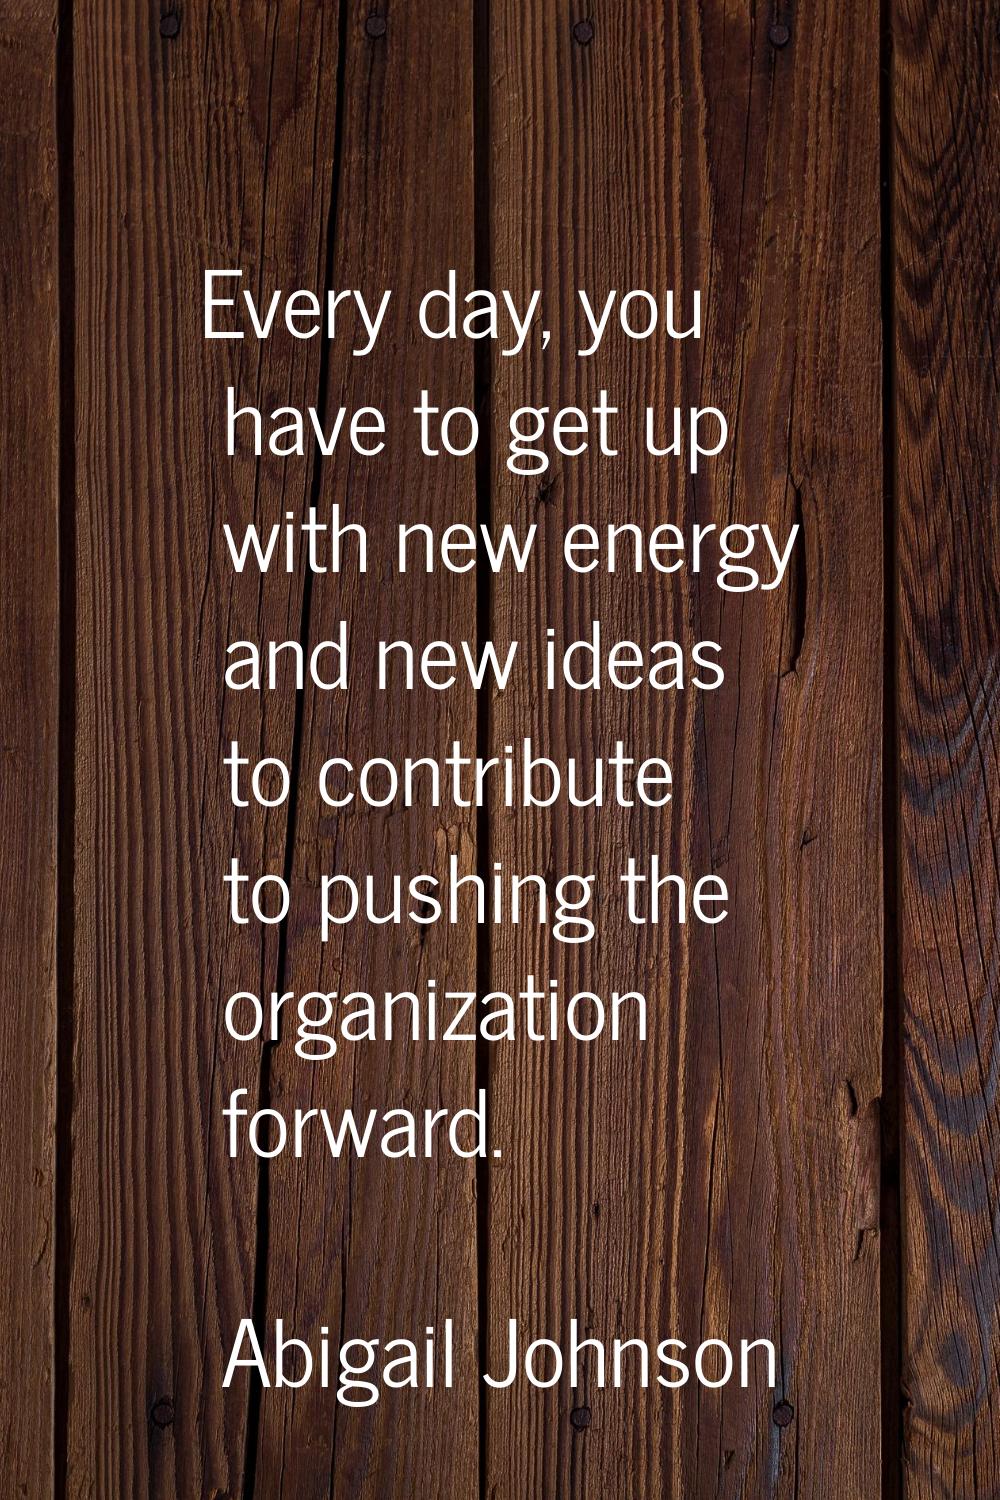 Every day, you have to get up with new energy and new ideas to contribute to pushing the organizati